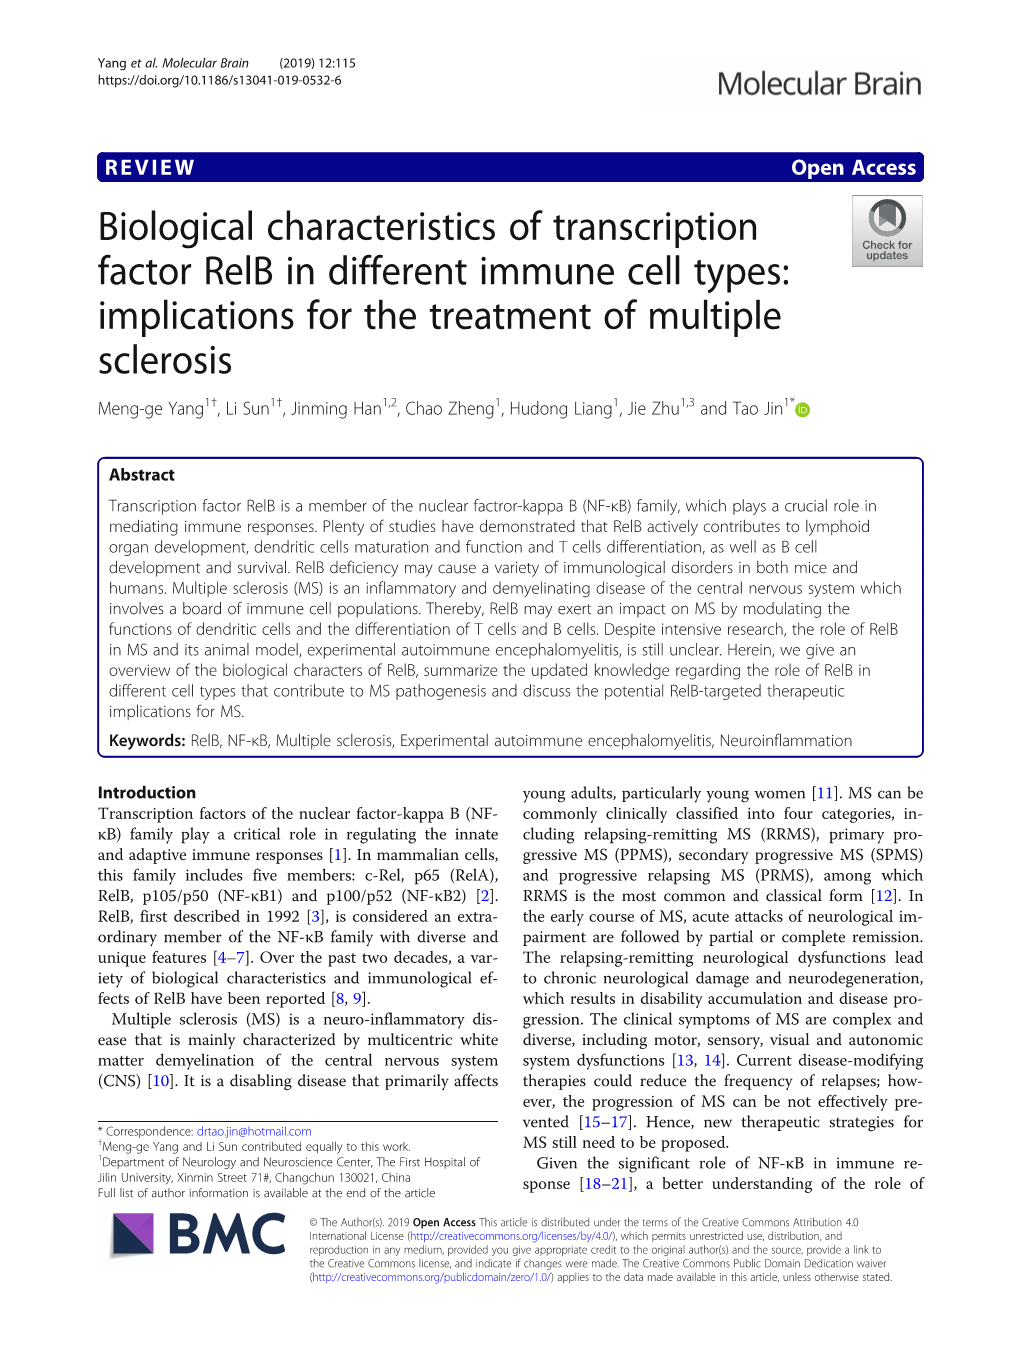 Biological Characteristics of Transcription Factor Relb in Different